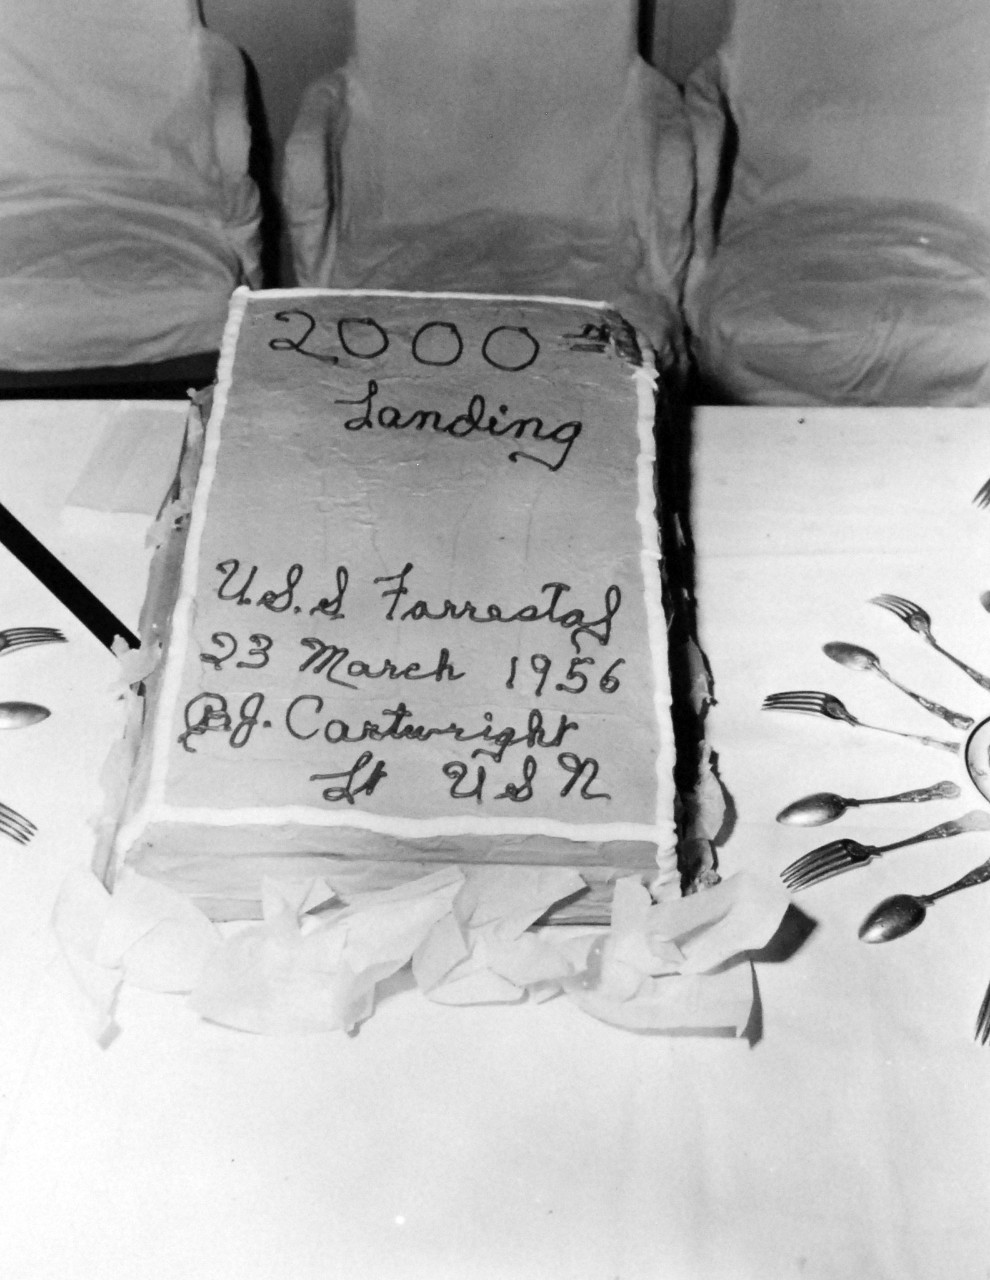 80-G-689658:  USS Forrestal (CVA-59), 1956.  Cake presented to Lieutenant Billy Cartwright for making the 2,000th landing board the carrier, March 23, 1956.   Official U.S. Navy Photograph, now in the collections of the National Archives.  (2017/11/01).   